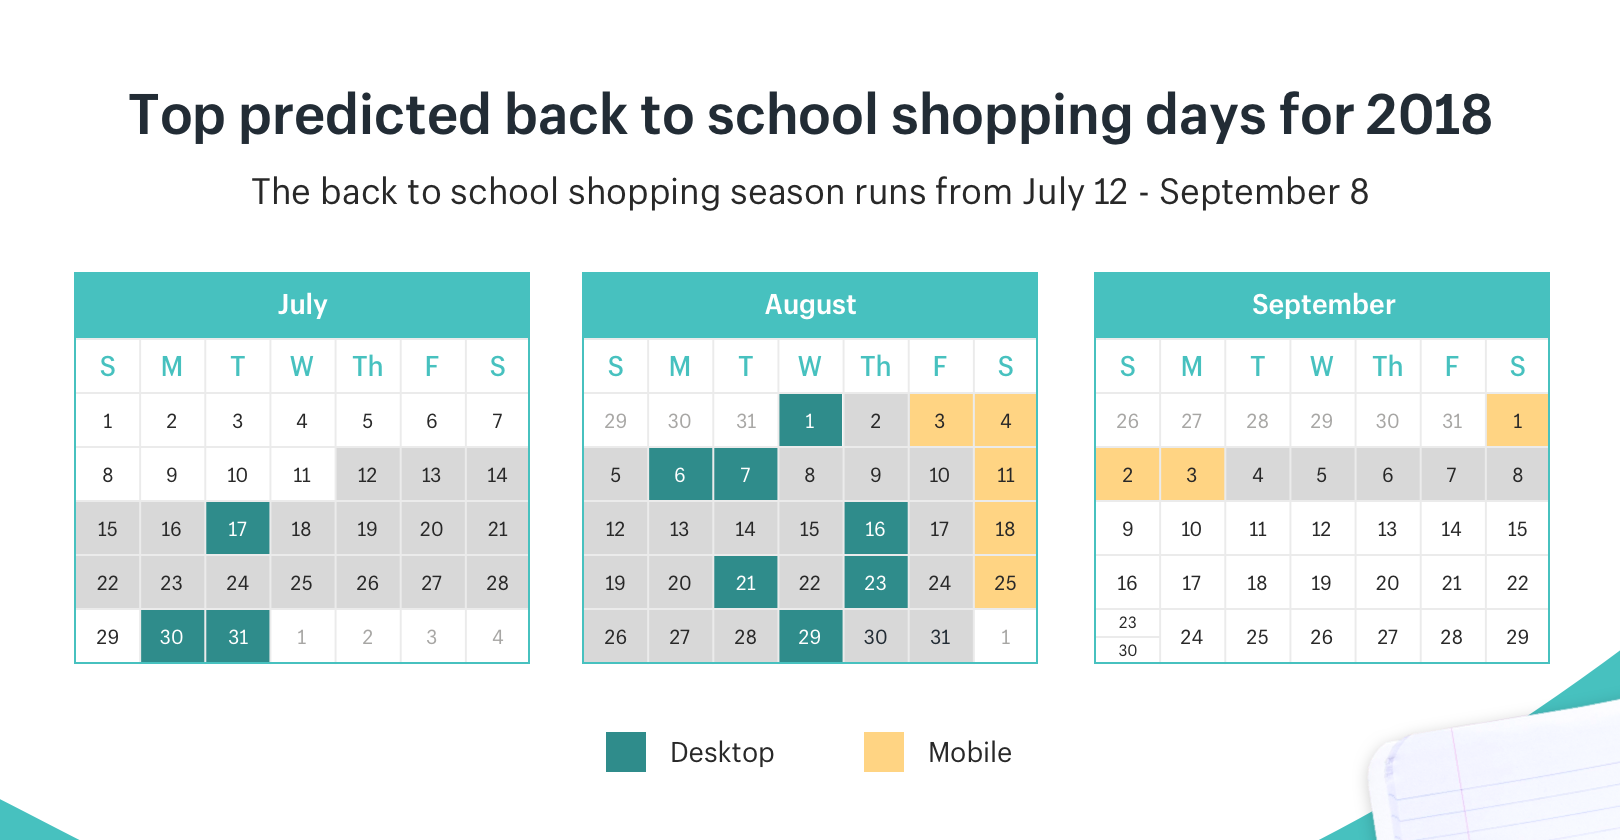 Top predicted back to school shopping days